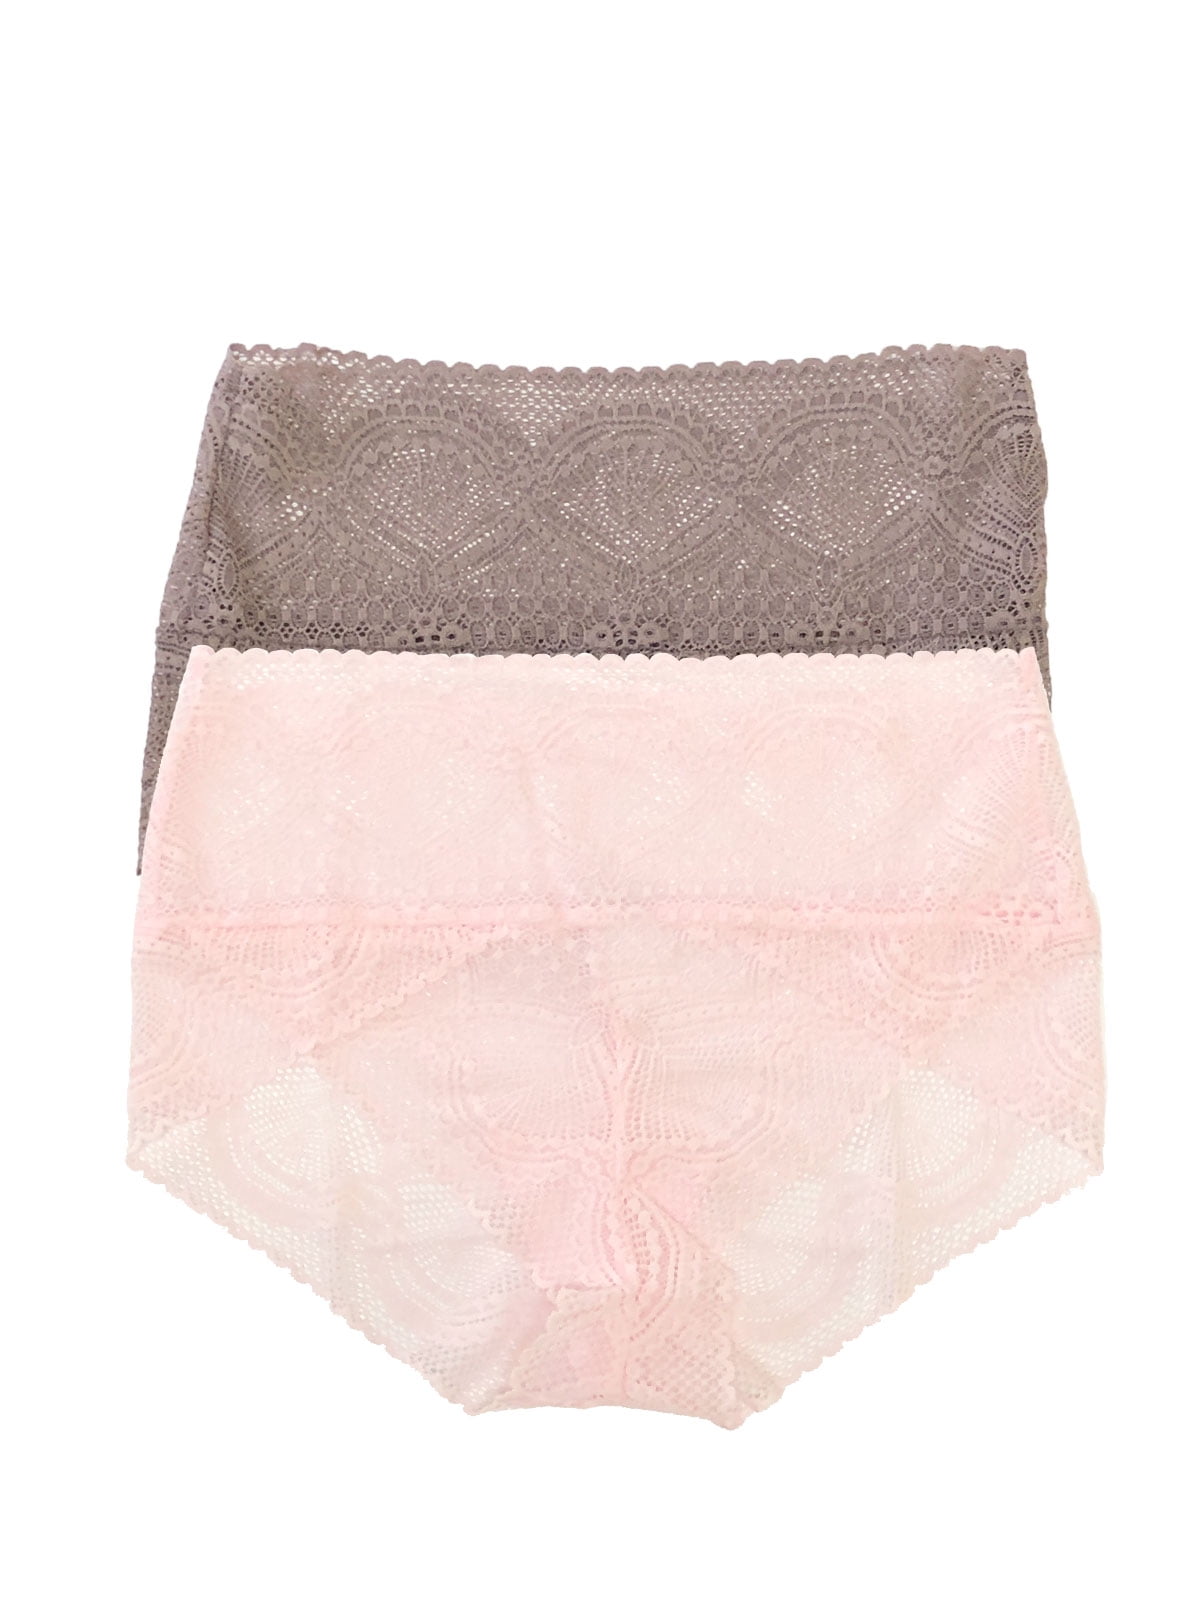 Felina, Finesse Modern Mock-Wrap Brief, Panty, Lace, Full Coverage